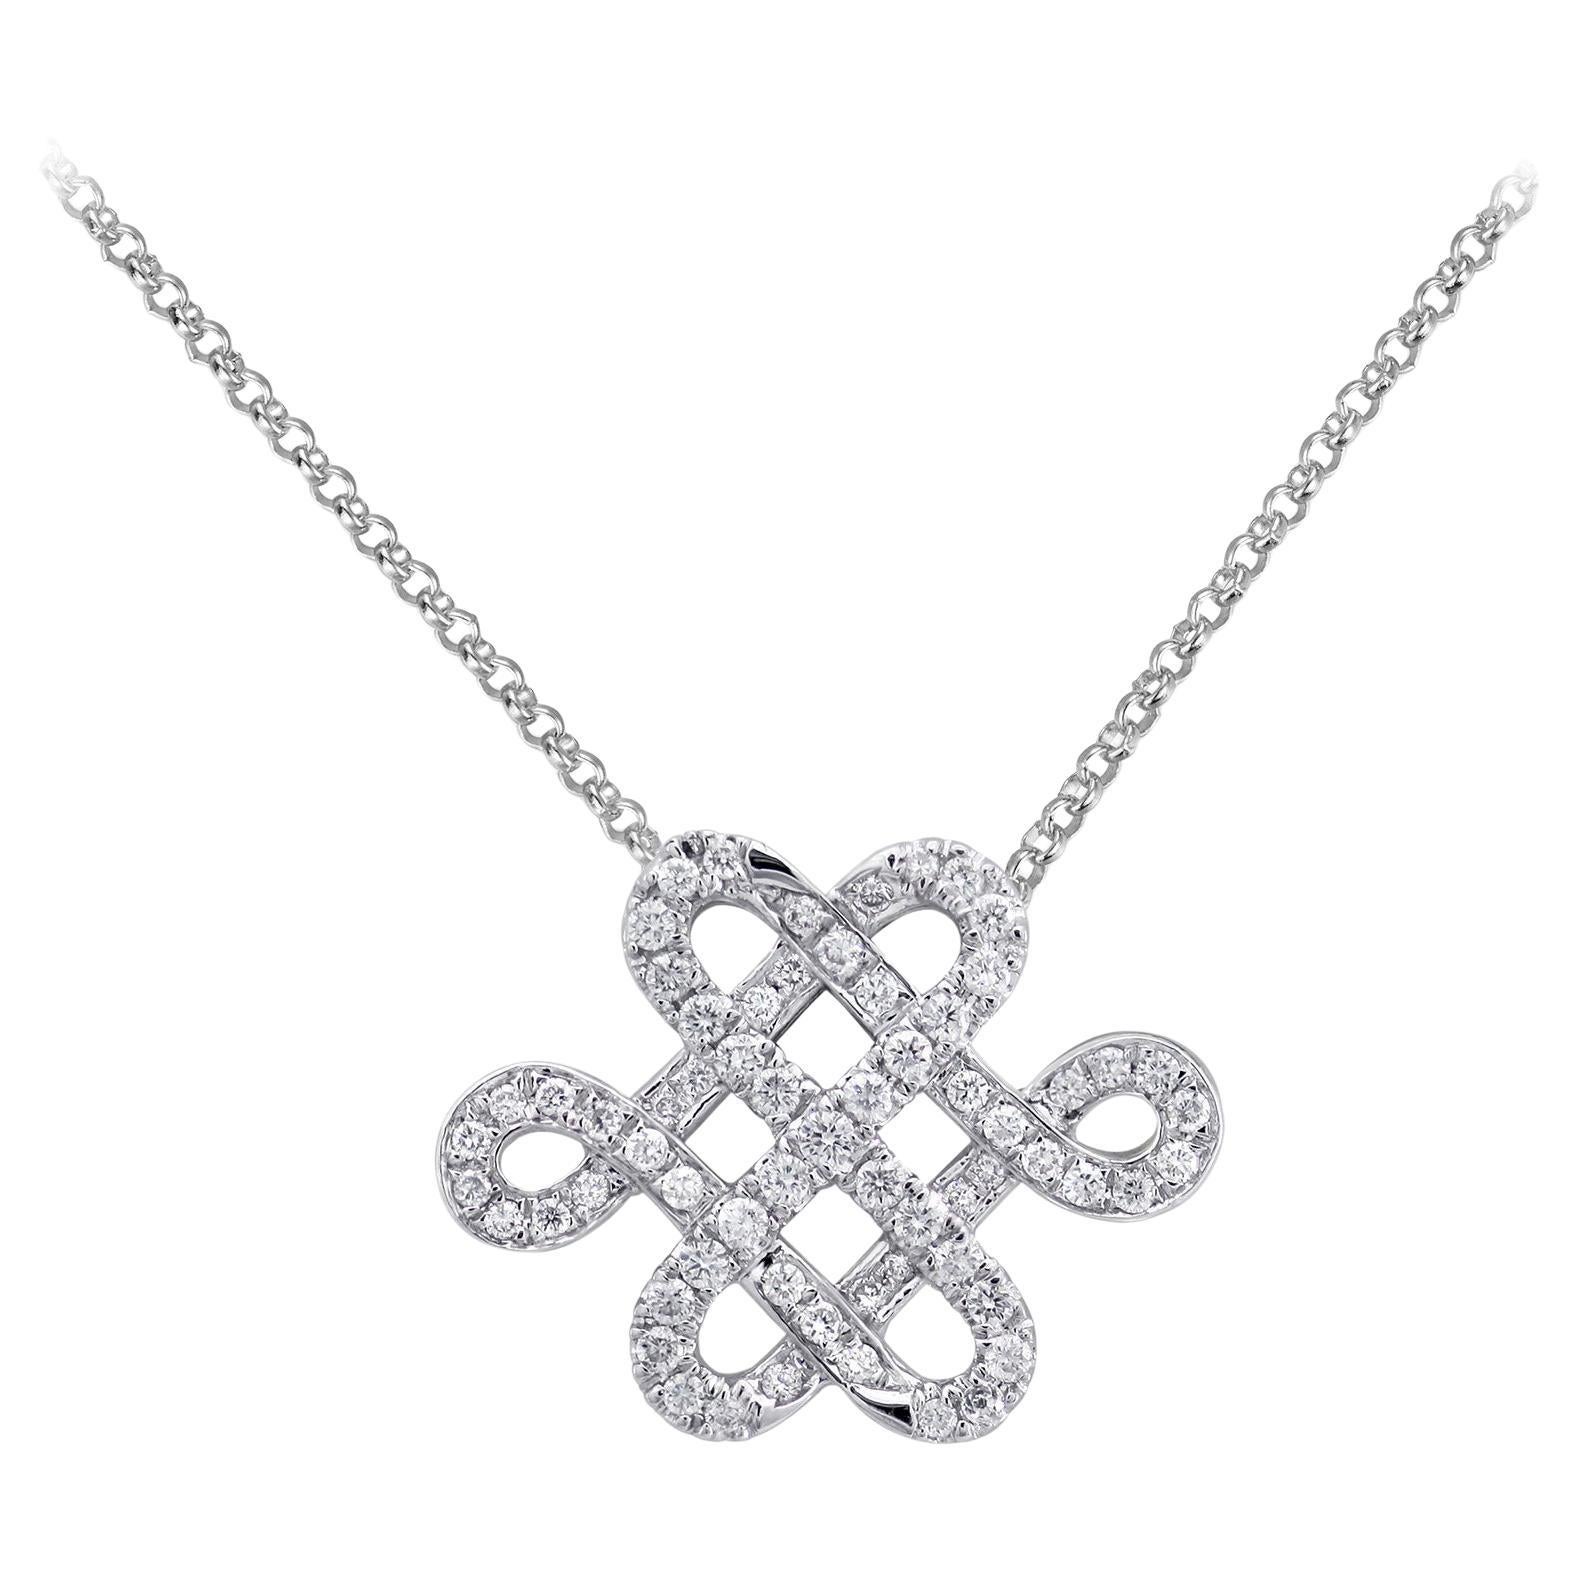 Young by Dilys' Legacy Eternal Knot Diamond Necklace in 18K White Gold For Sale